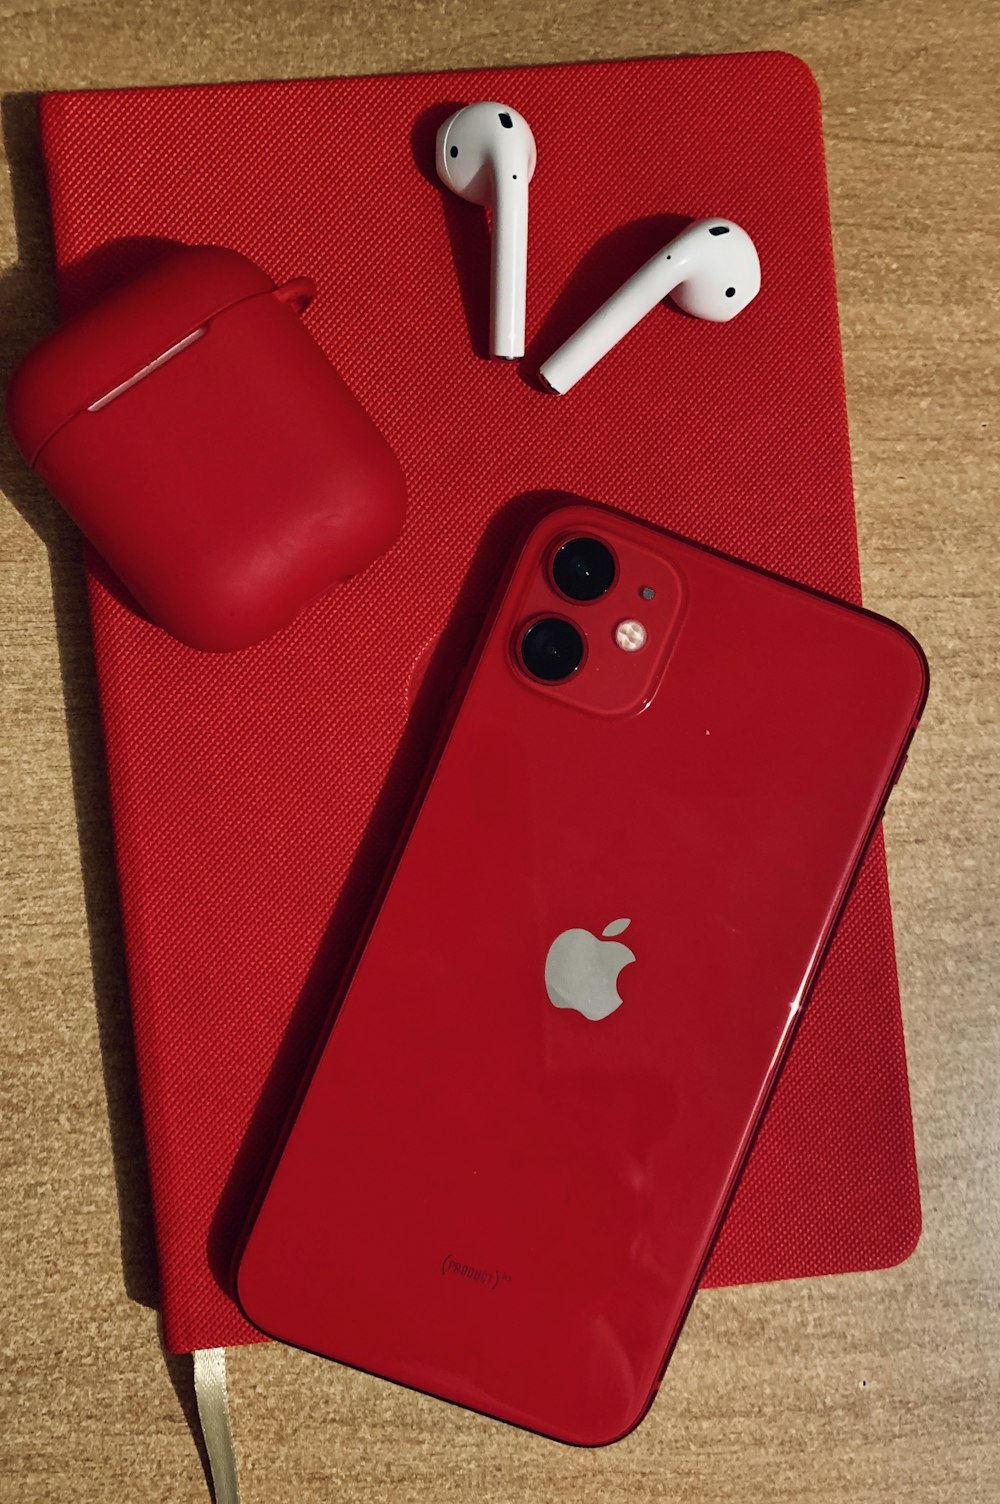 red iphone 7 plus on red textile